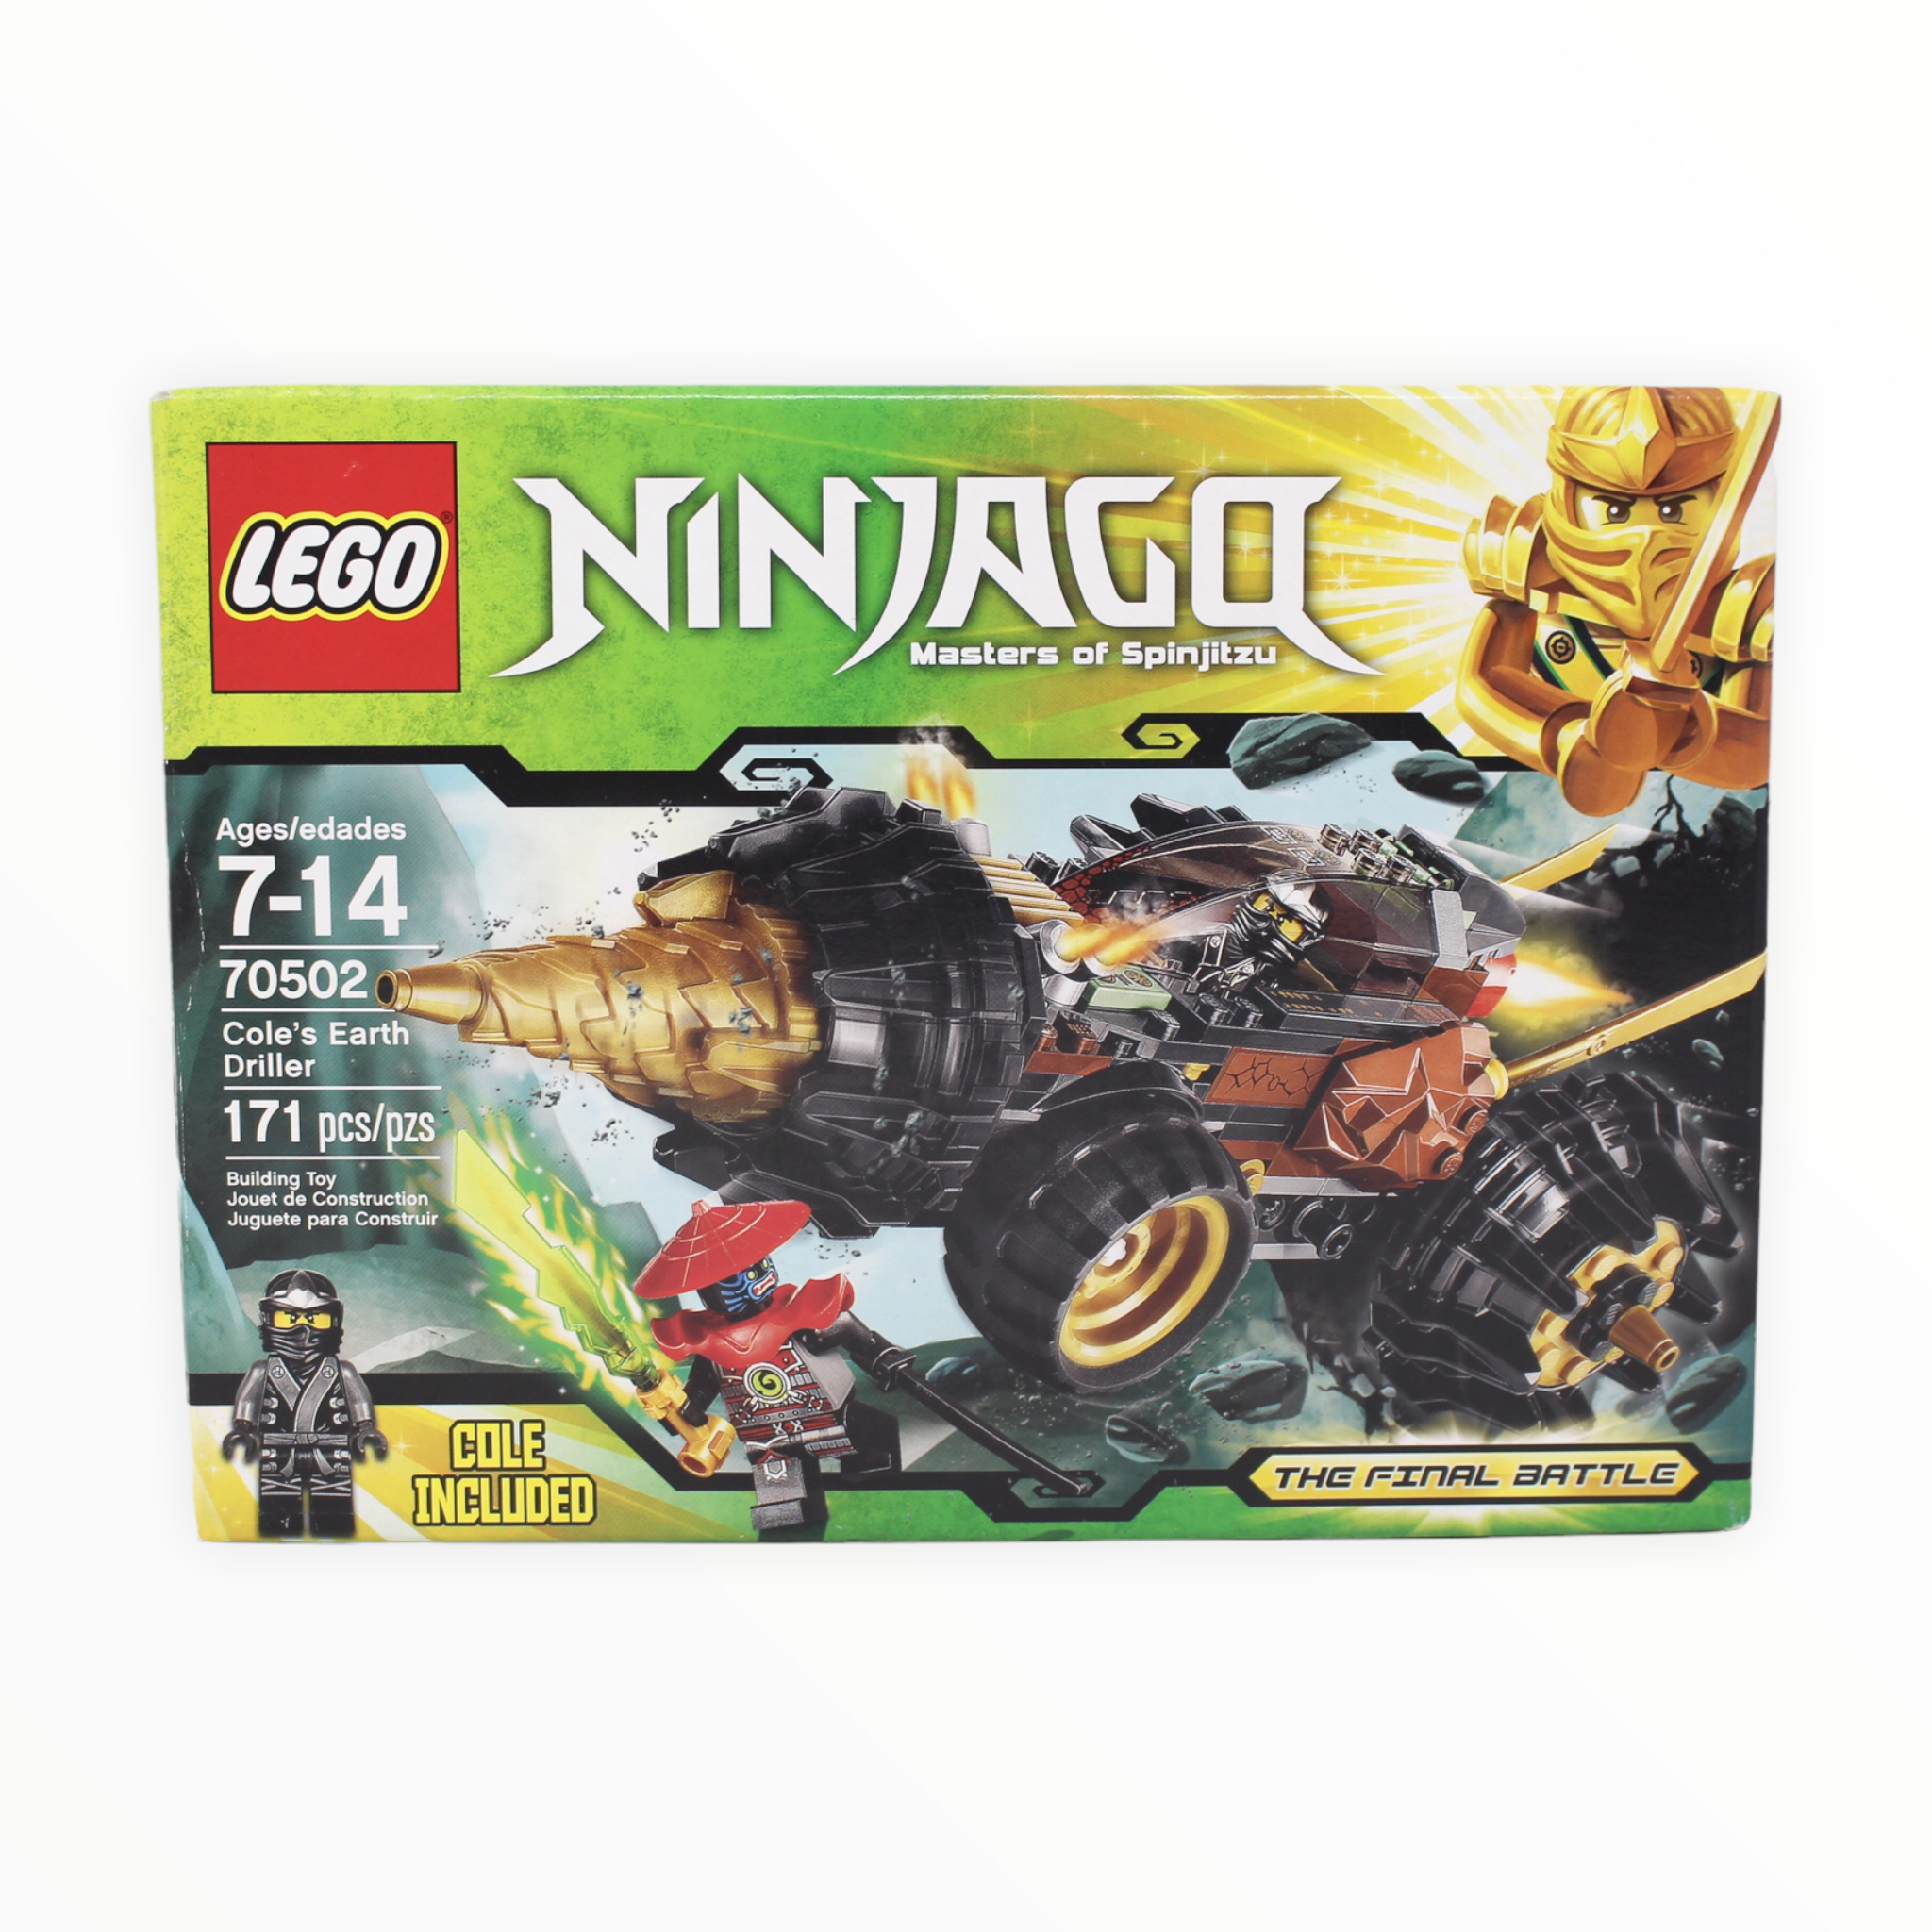 Certified Used Set 70502 Ninjago Cole’s Earth Driller